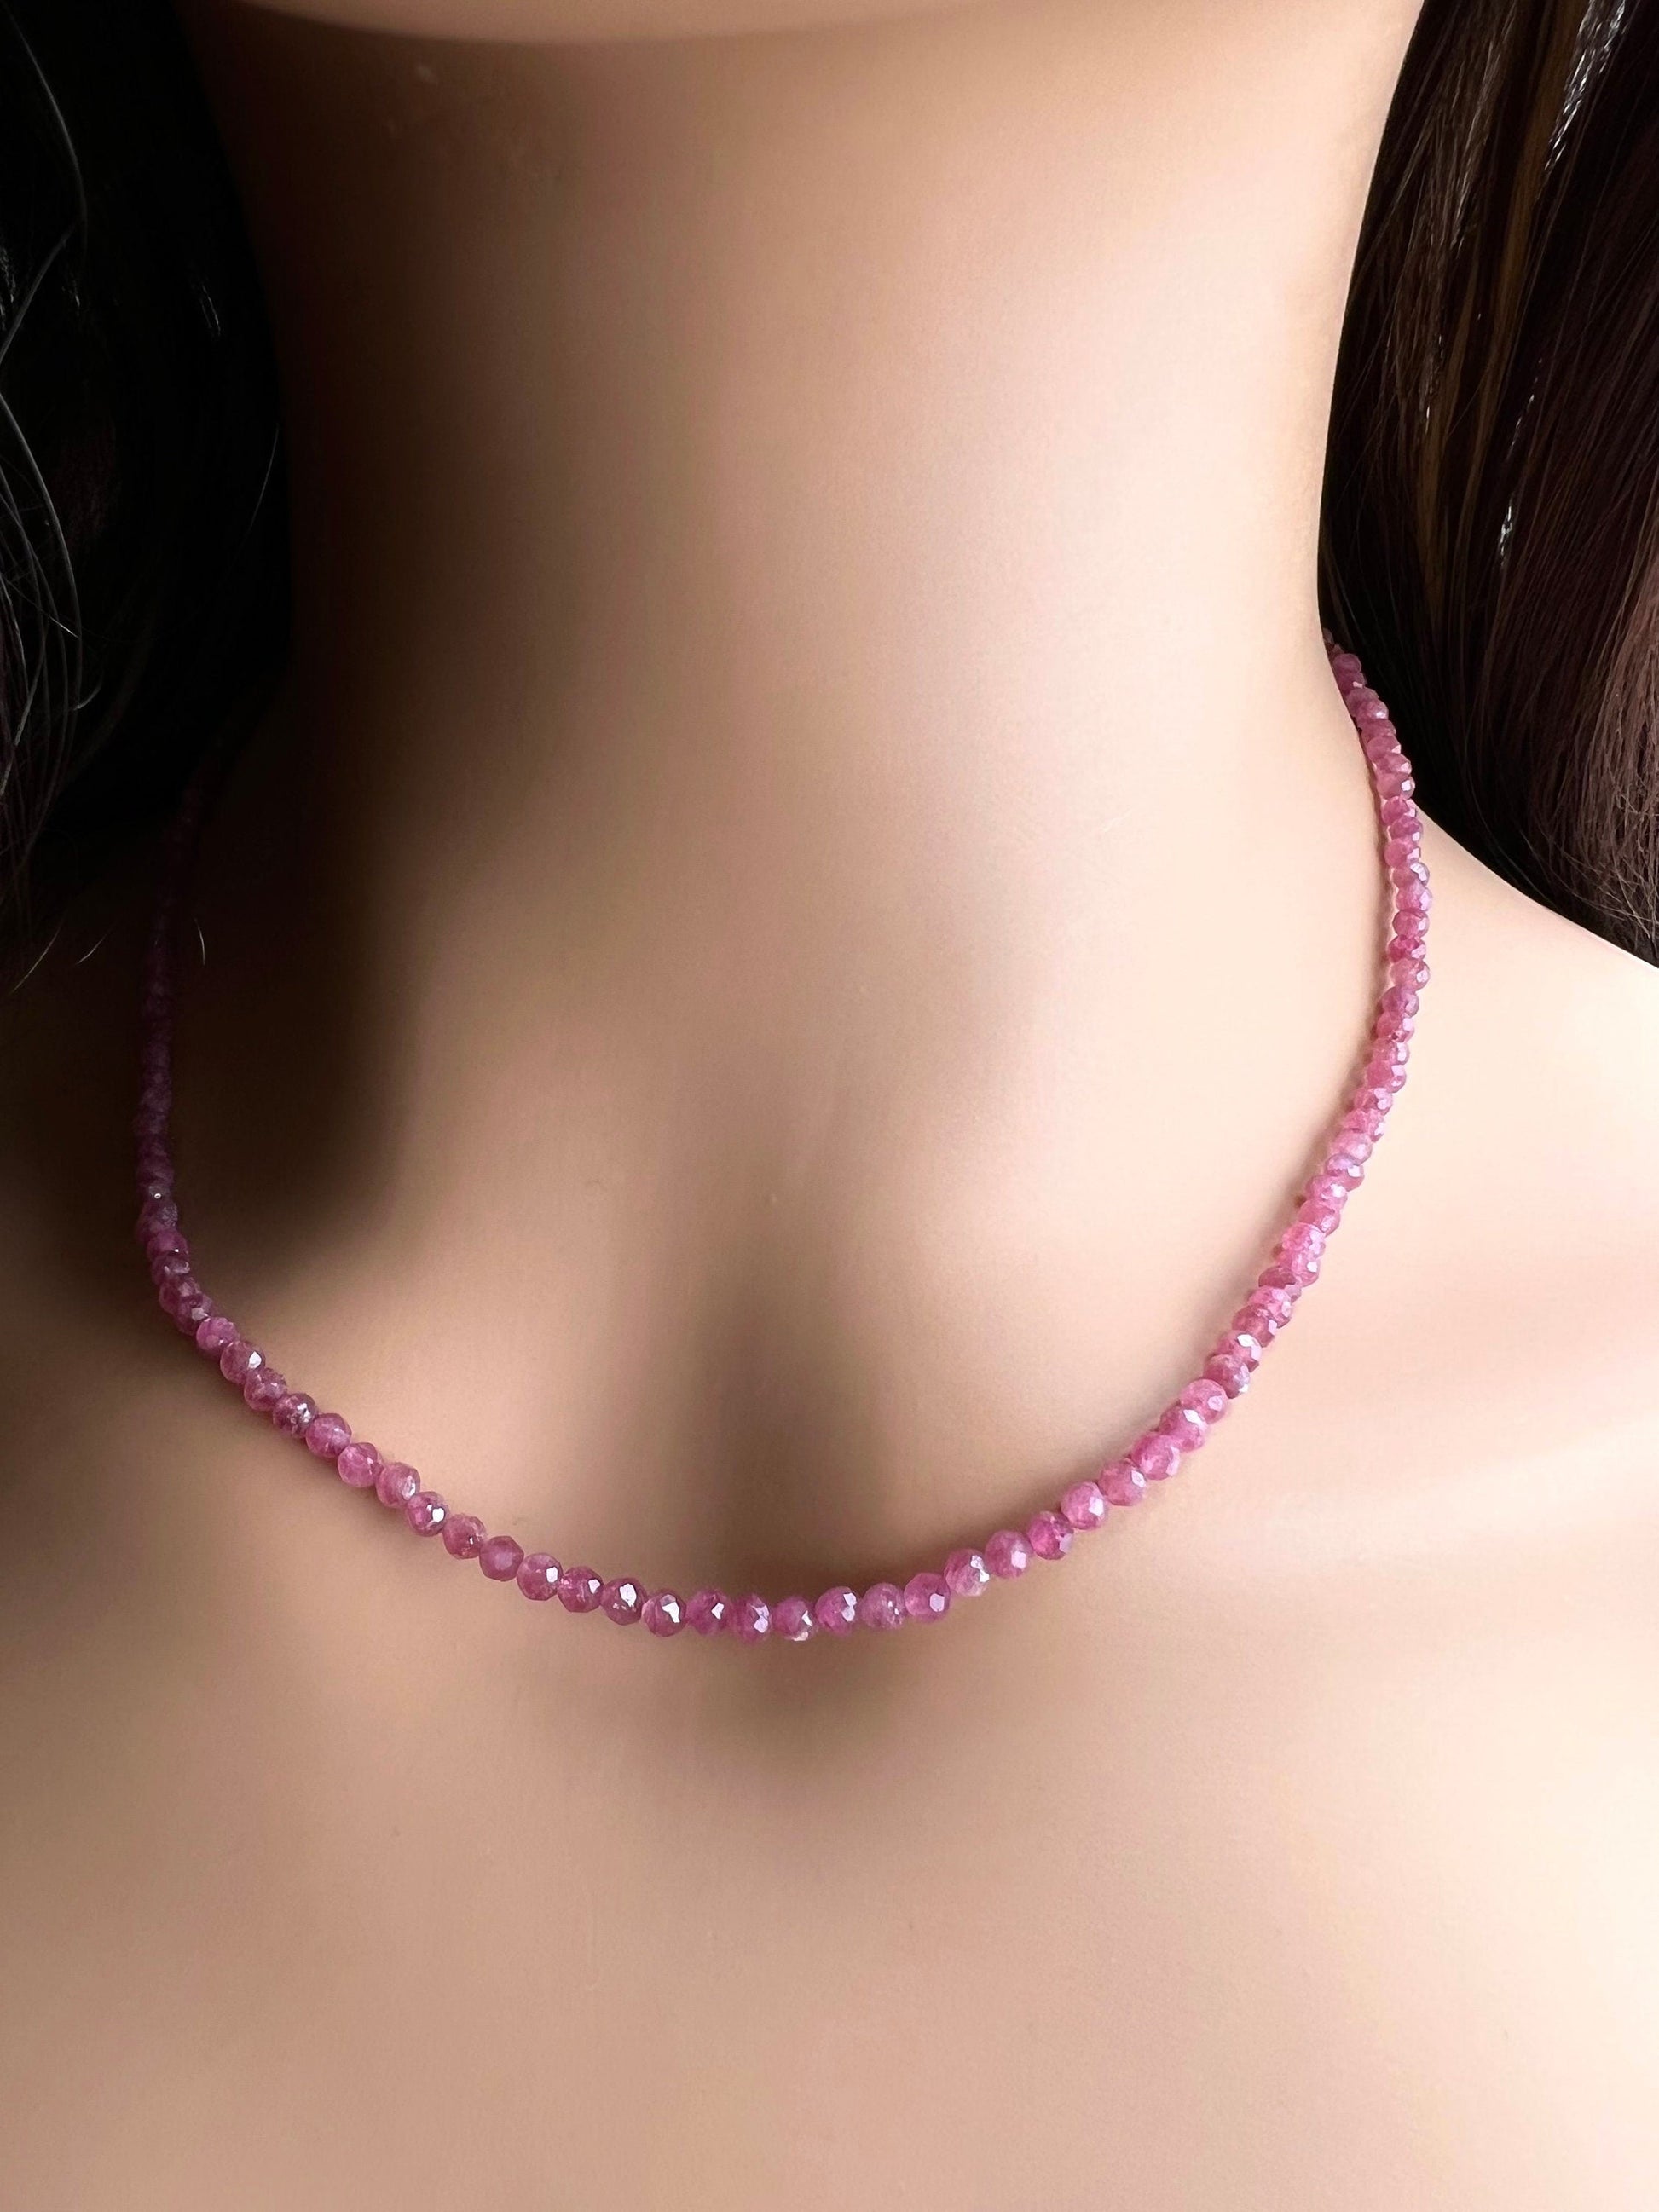 Natural Pink Tourmaline 2.5mm Faceted Round in 925 Sterling Silver Handmade necklace Healing, Energy, Precious Gift